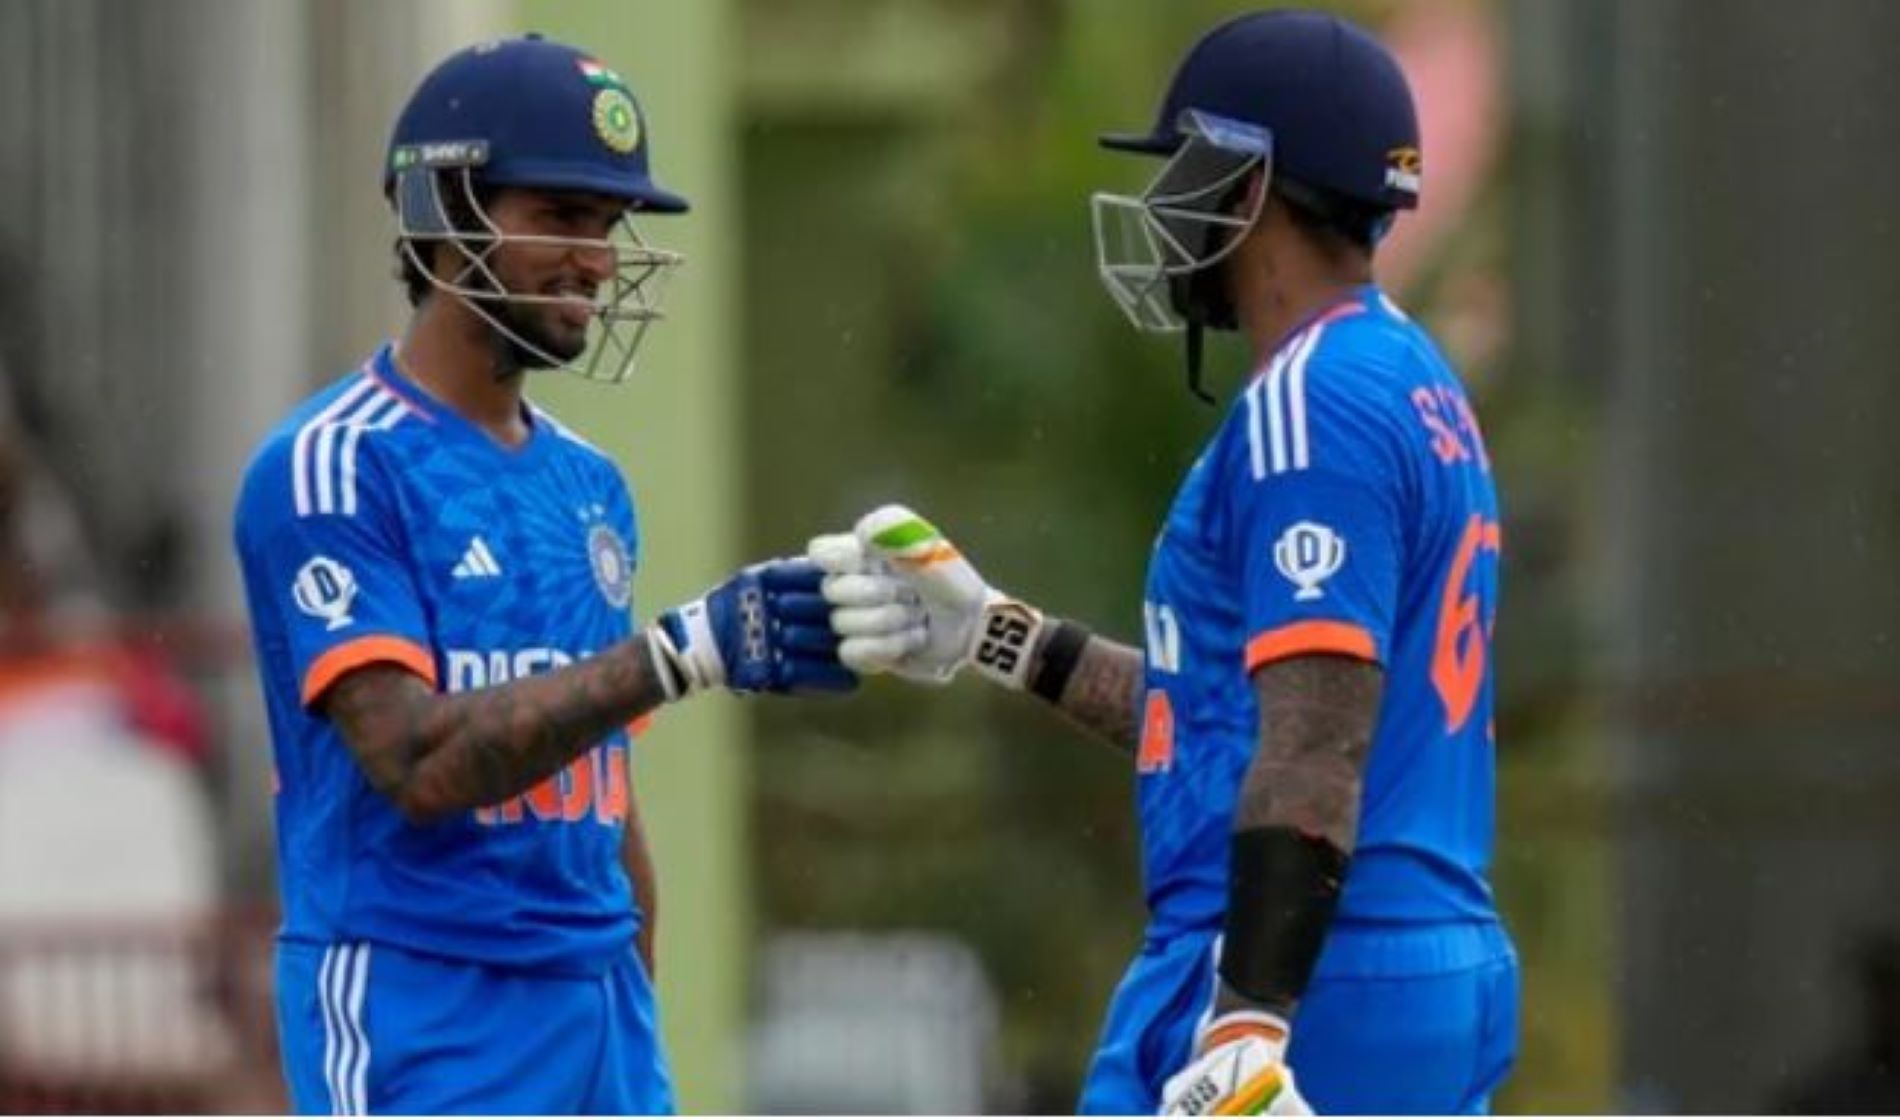 The Mumbai Indians duo could be pushing for one spot in the Indian middle-order